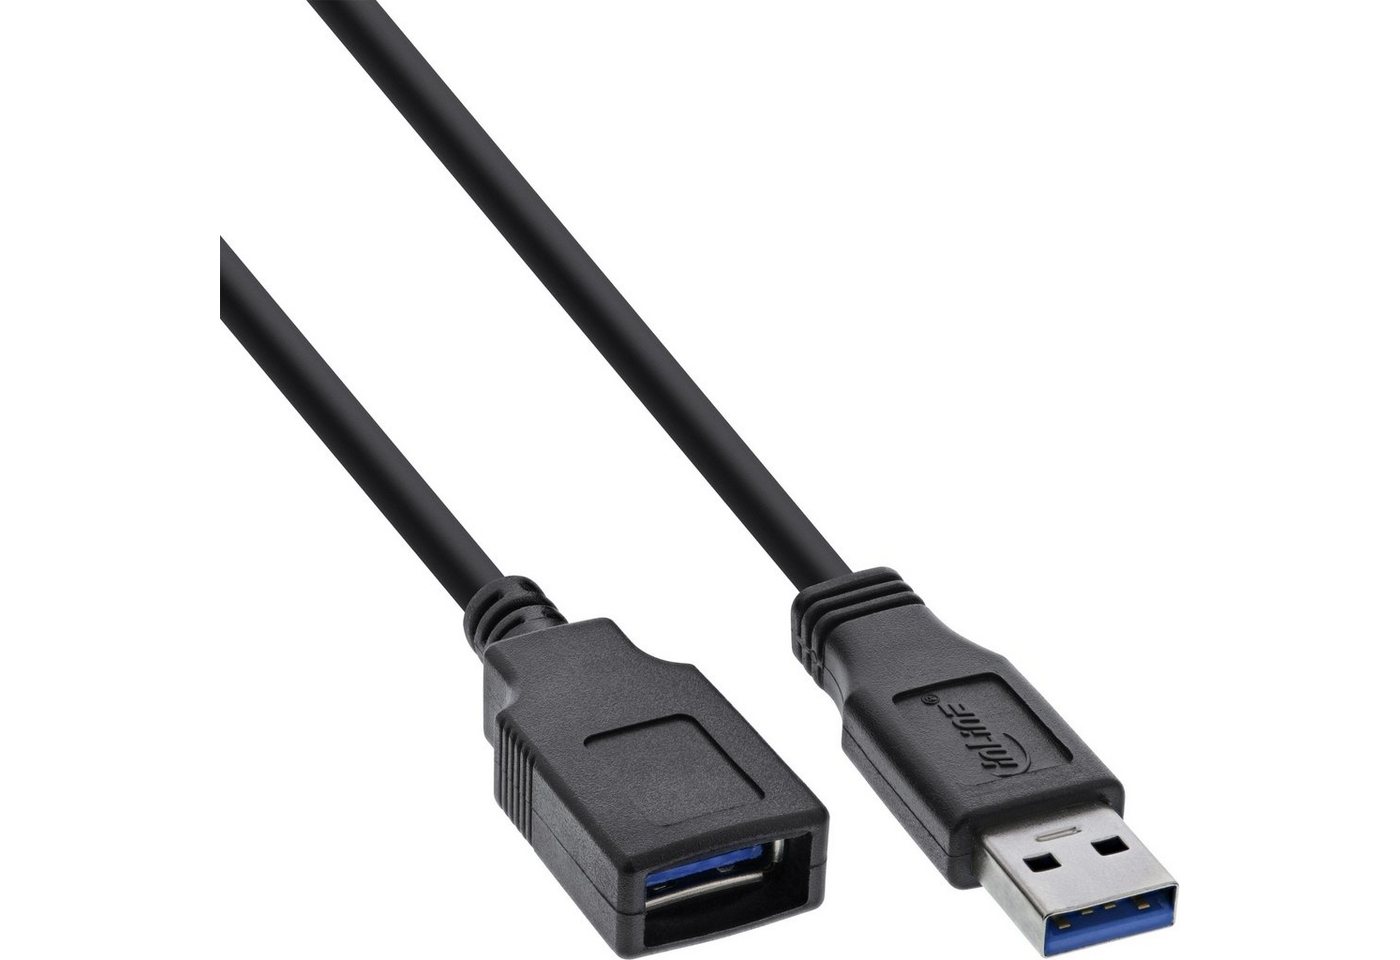 INTOS ELECTRONIC AG InLine® USB 3.0 Kabel, A Stecker / Buchse, schwarz, 2,5m USB-Kabel von INTOS ELECTRONIC AG